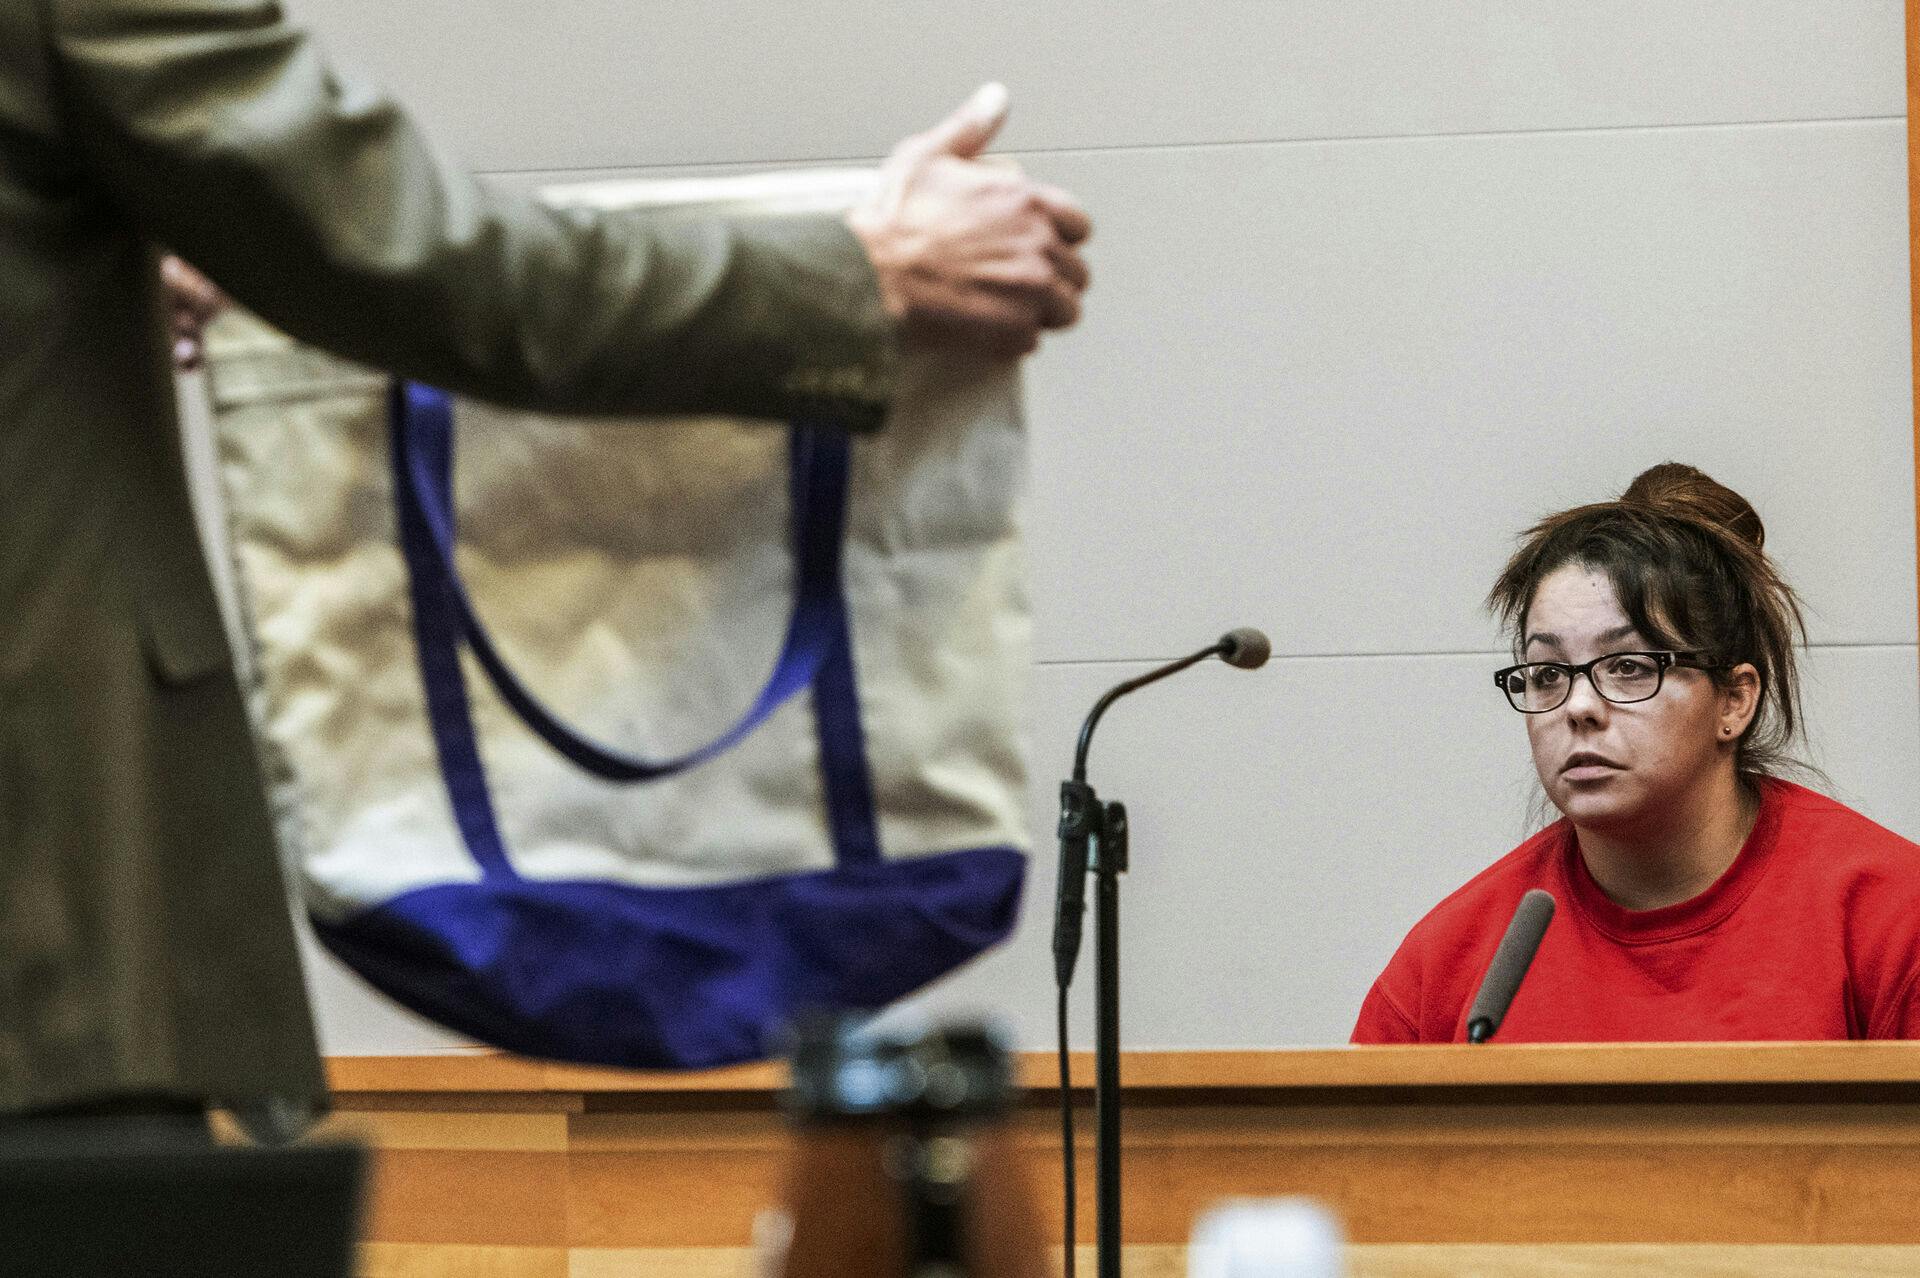 Kayla Montgomery is shown a tote bag while testifying during the trial of Adam Montgomery at Hillsborough County Superior Court, Monday Feb. 12, 2024, in Manchester, N.H. Adam Montgomery is accused of killing his 5-year-old daughter and spending months moving her body before disposing of it. (Jeffrey Hastings/Pool Photo via AP)